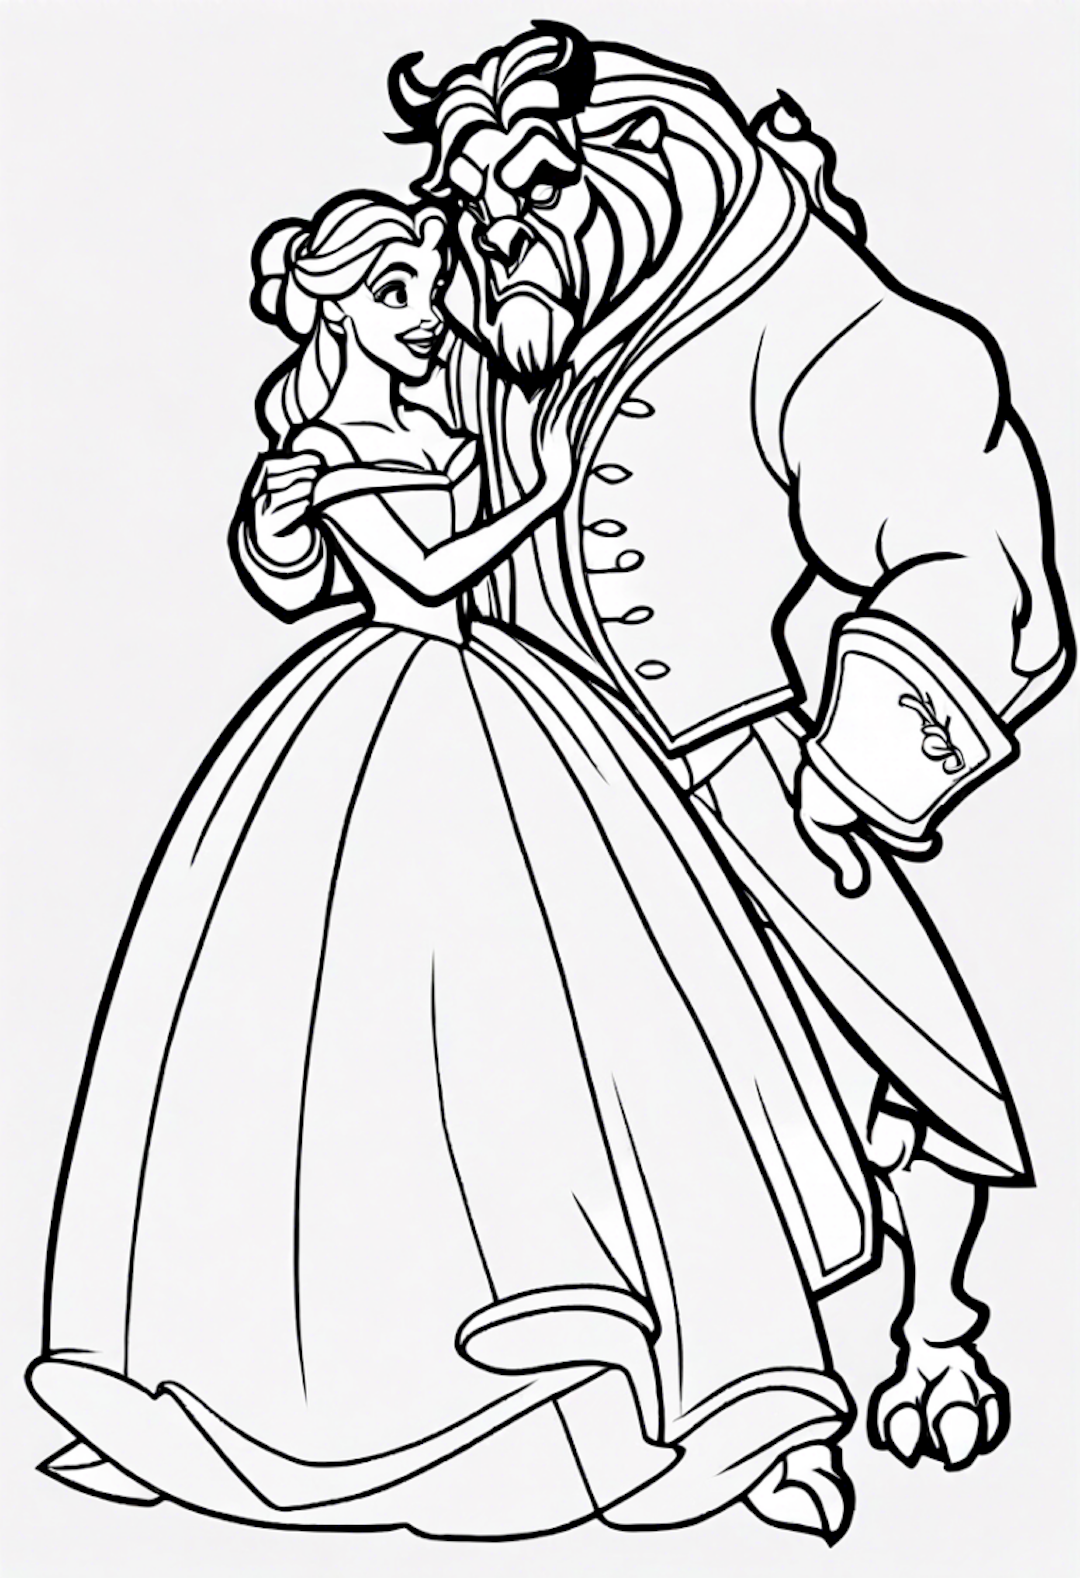 Belle and Beast’s Enchanted Dance coloring pages